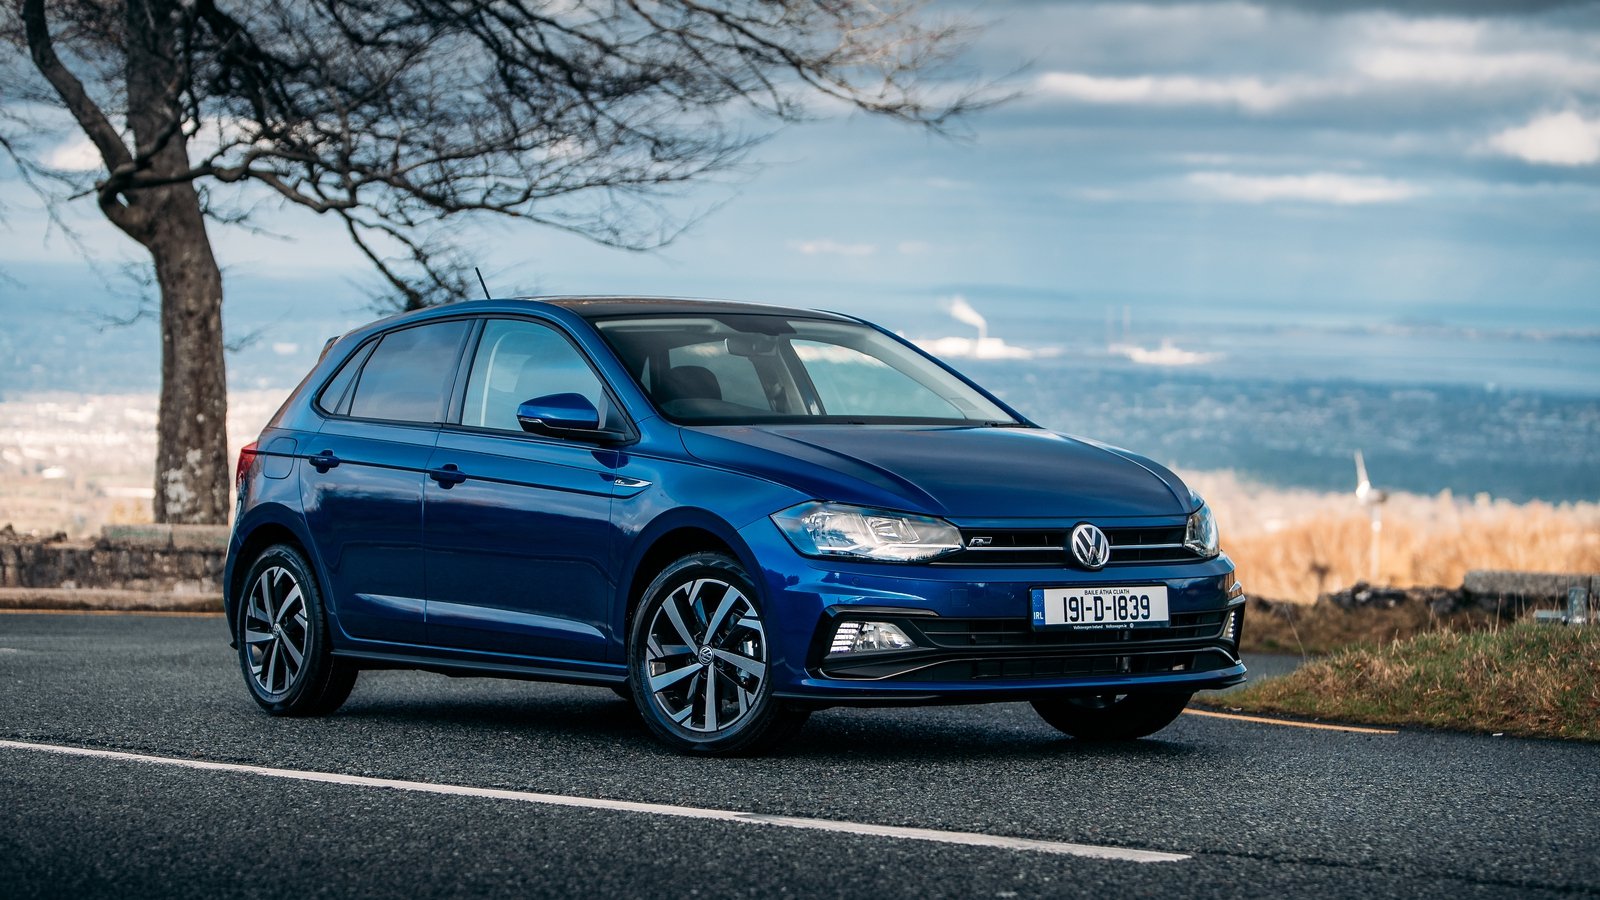 When Volkswagen's Polo became a Golf review